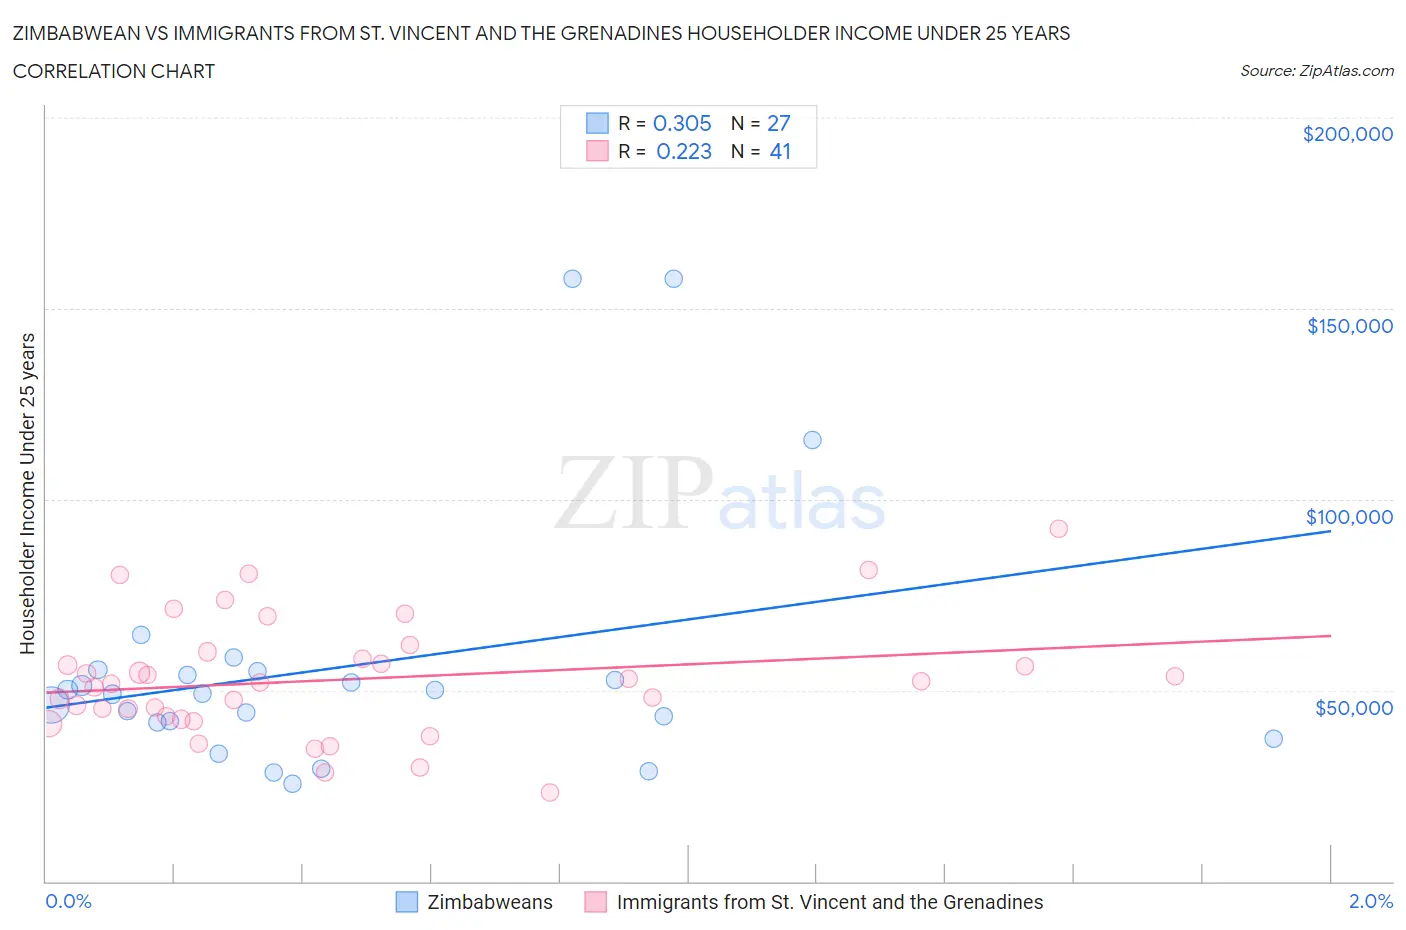 Zimbabwean vs Immigrants from St. Vincent and the Grenadines Householder Income Under 25 years